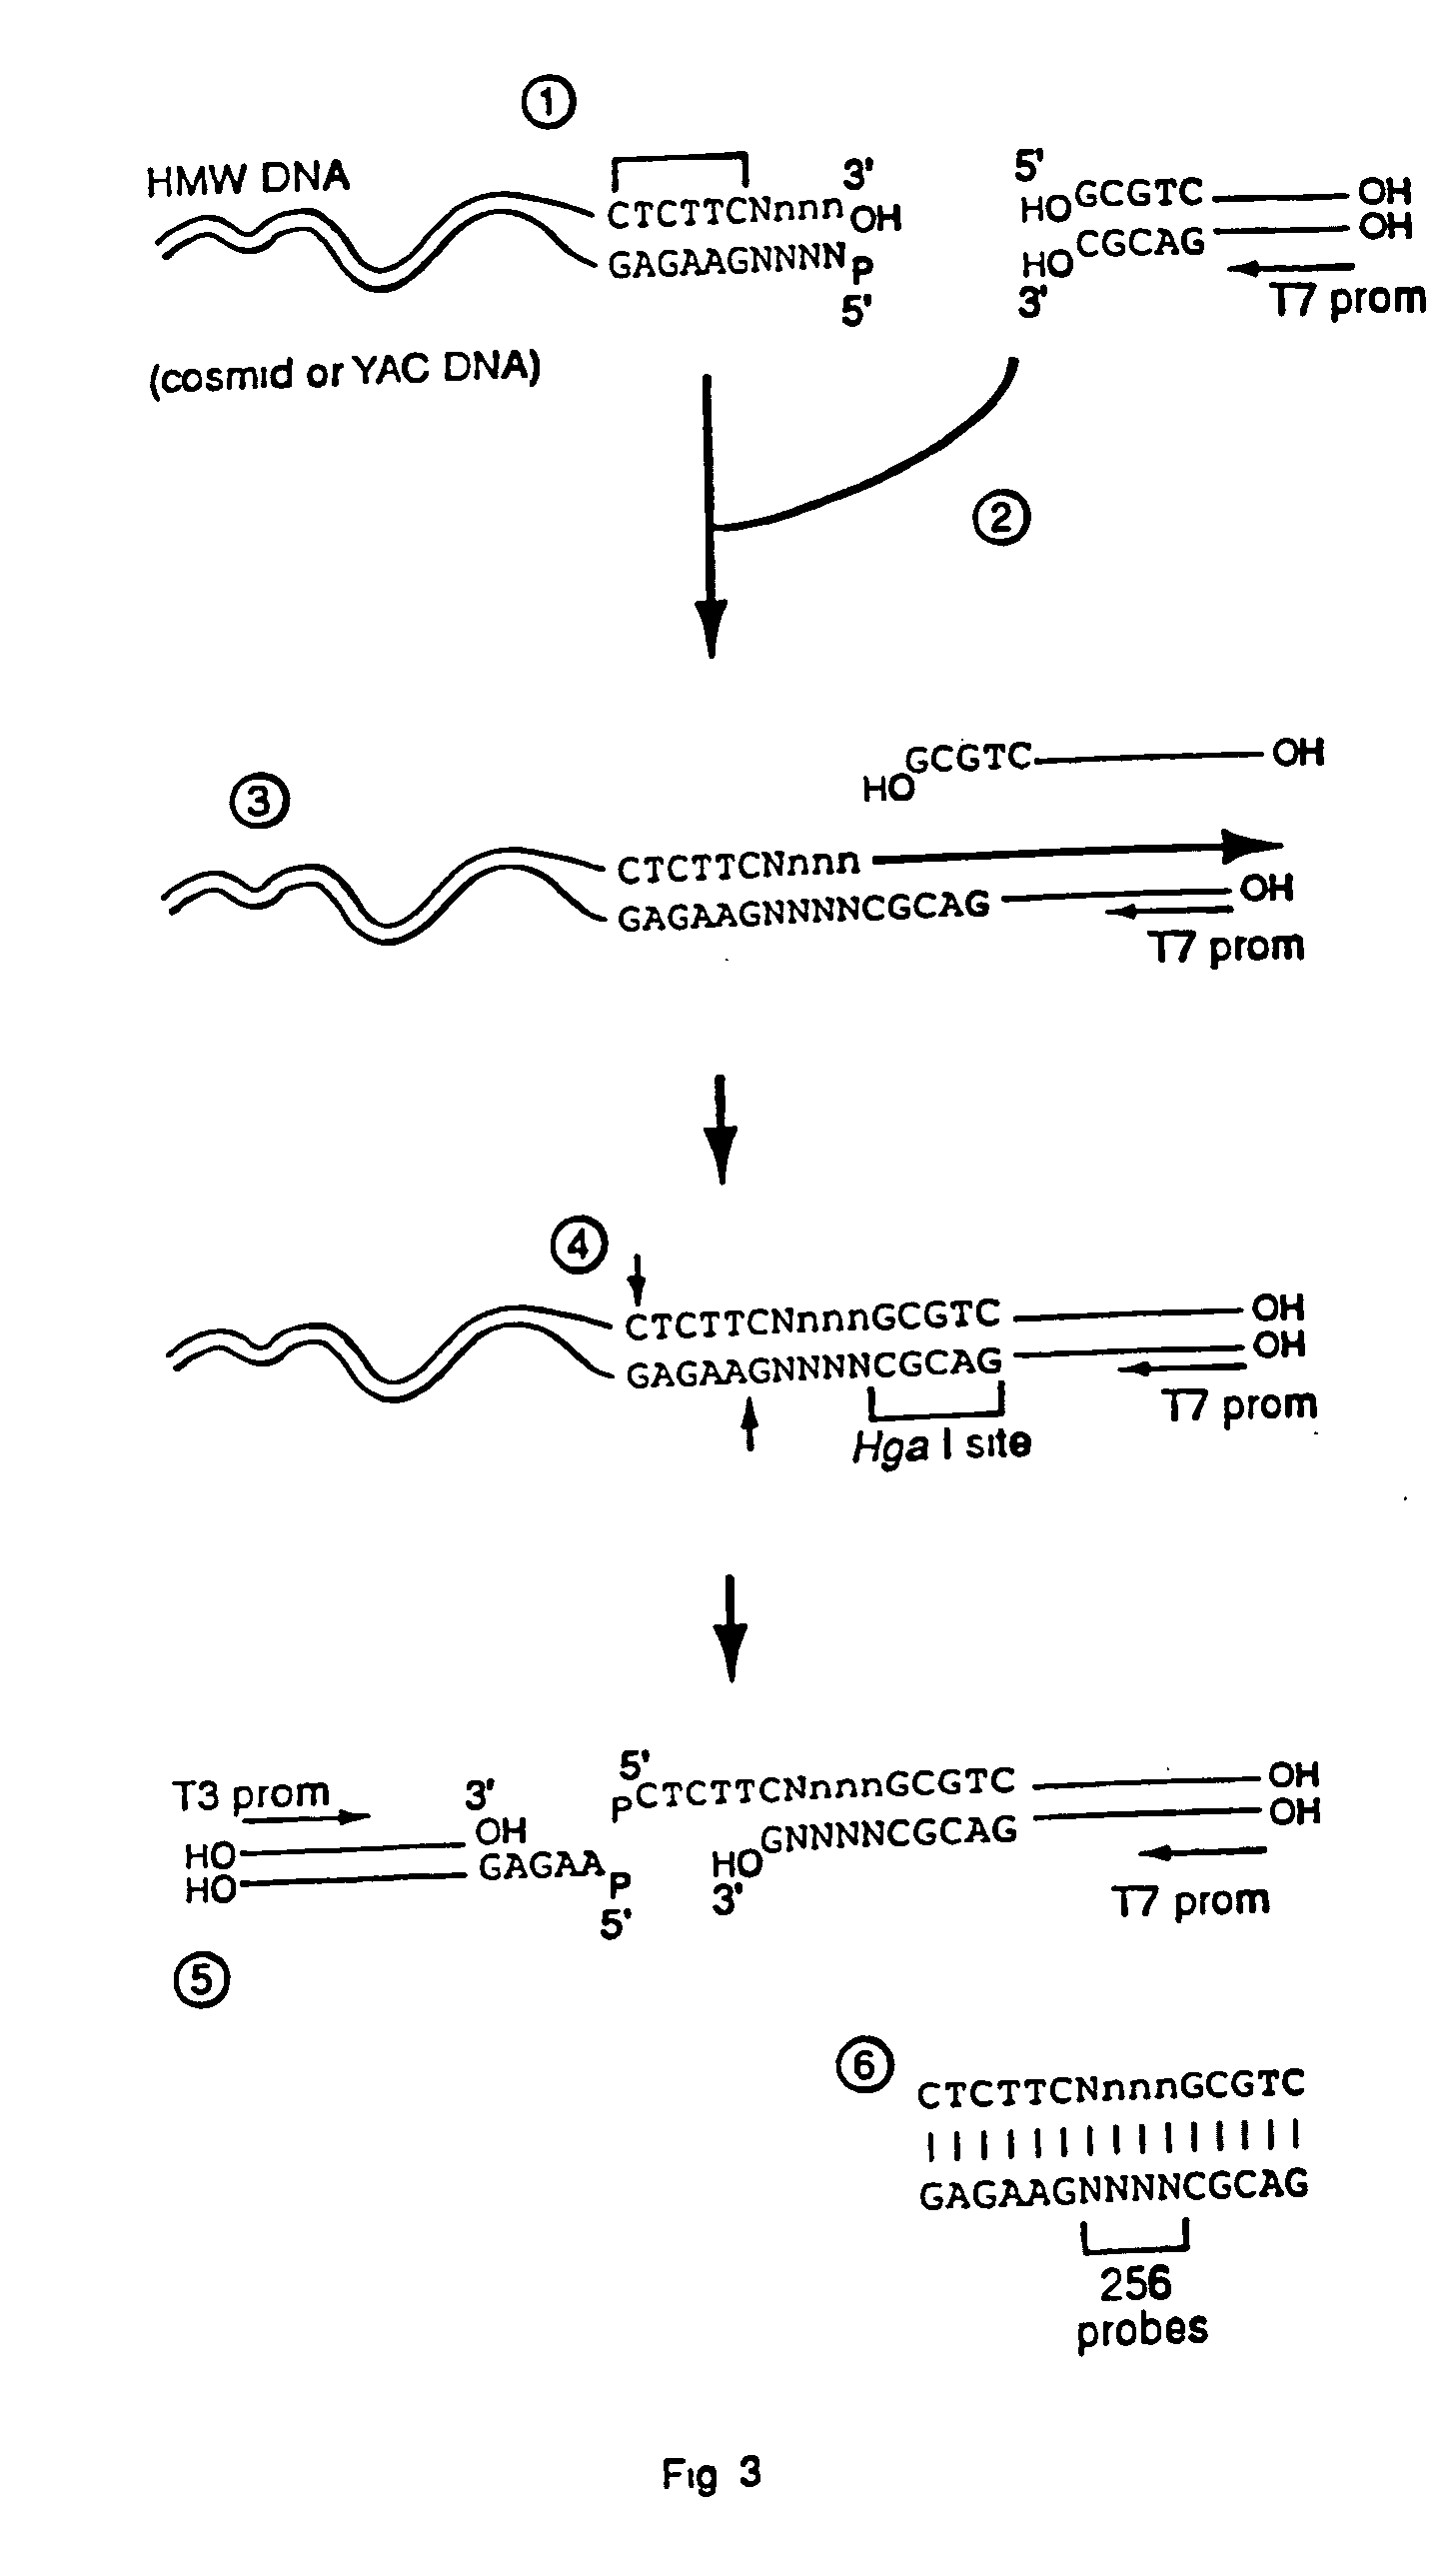 Capturing sequences adjacent to type-IIS restriction sites for genomic library mapping